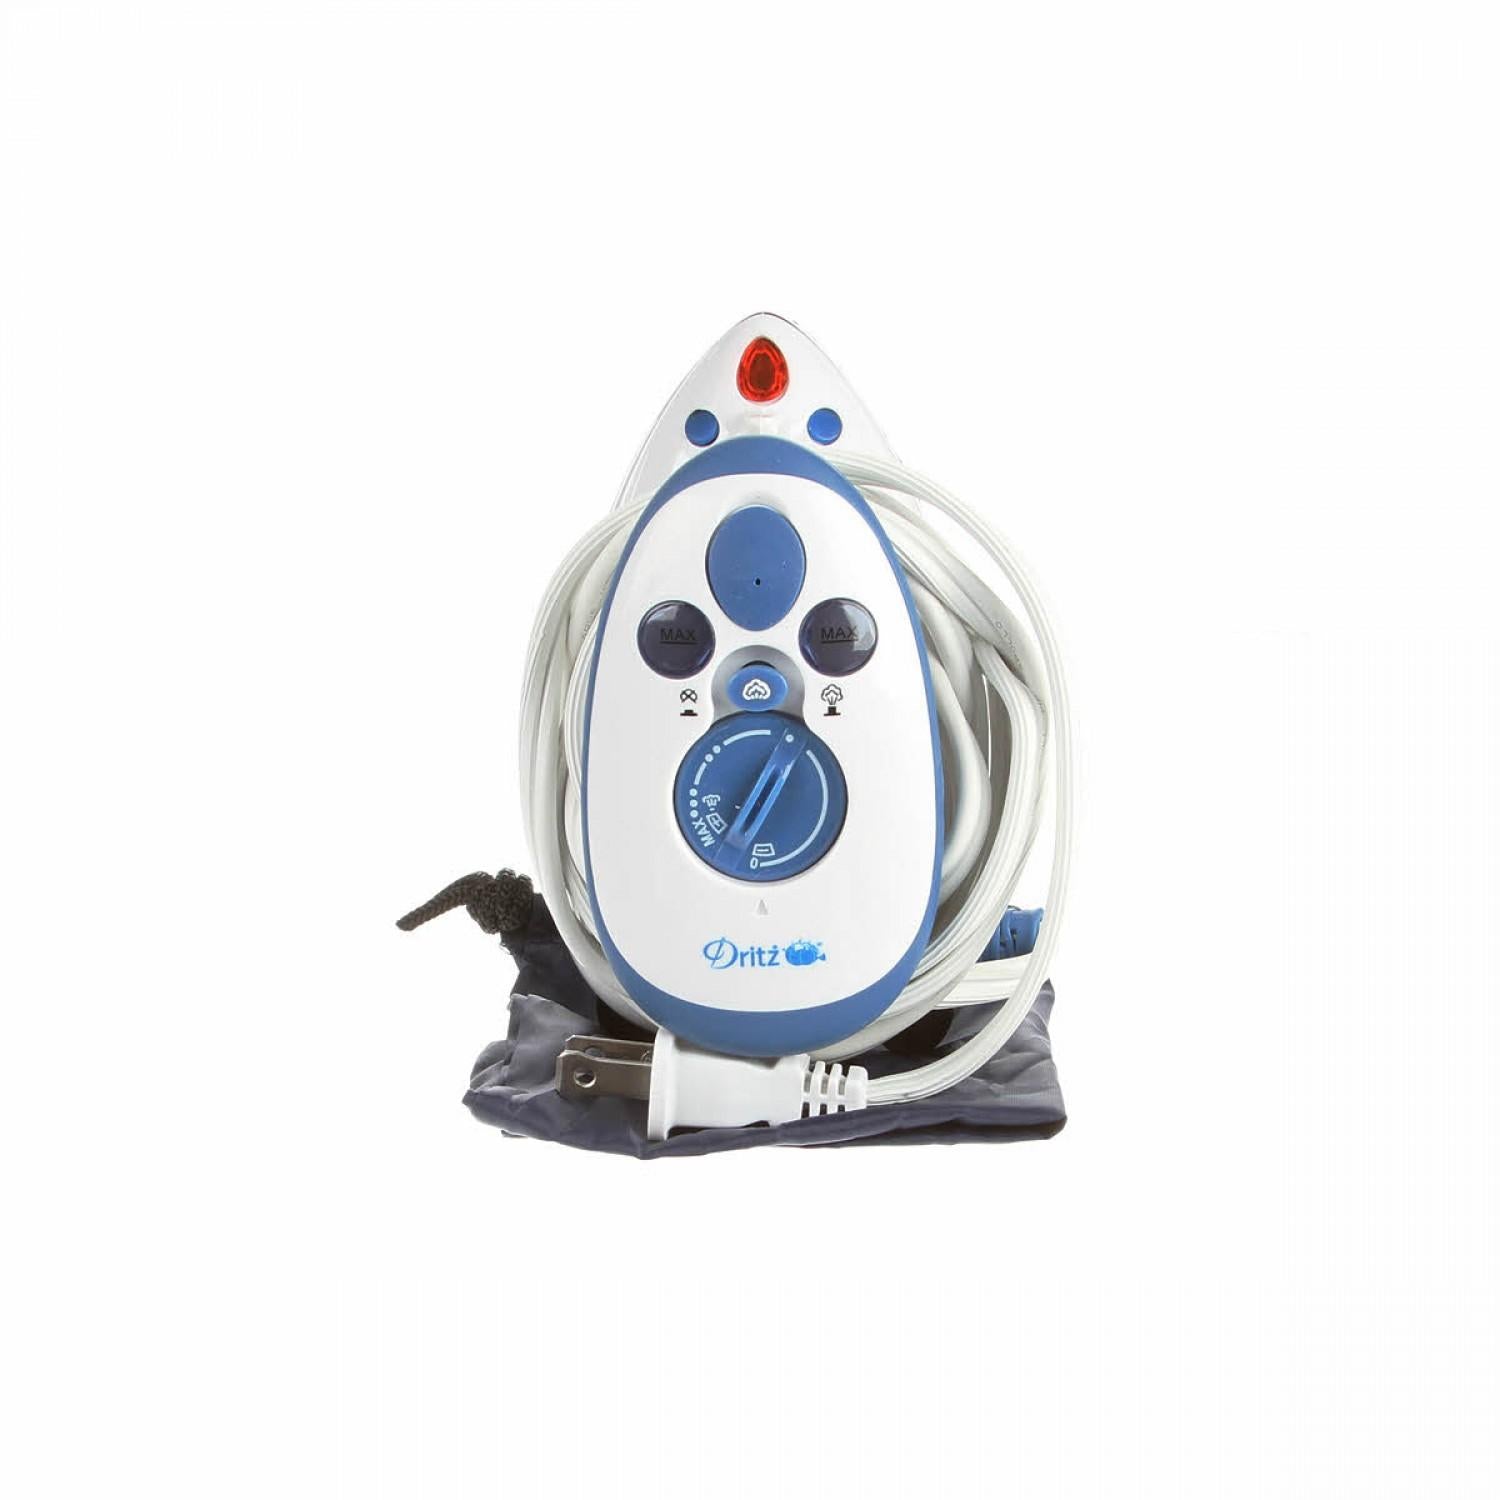 Dritz 653380 Mighty Travel Steam Iron with Storage Bag and Measuring Cup